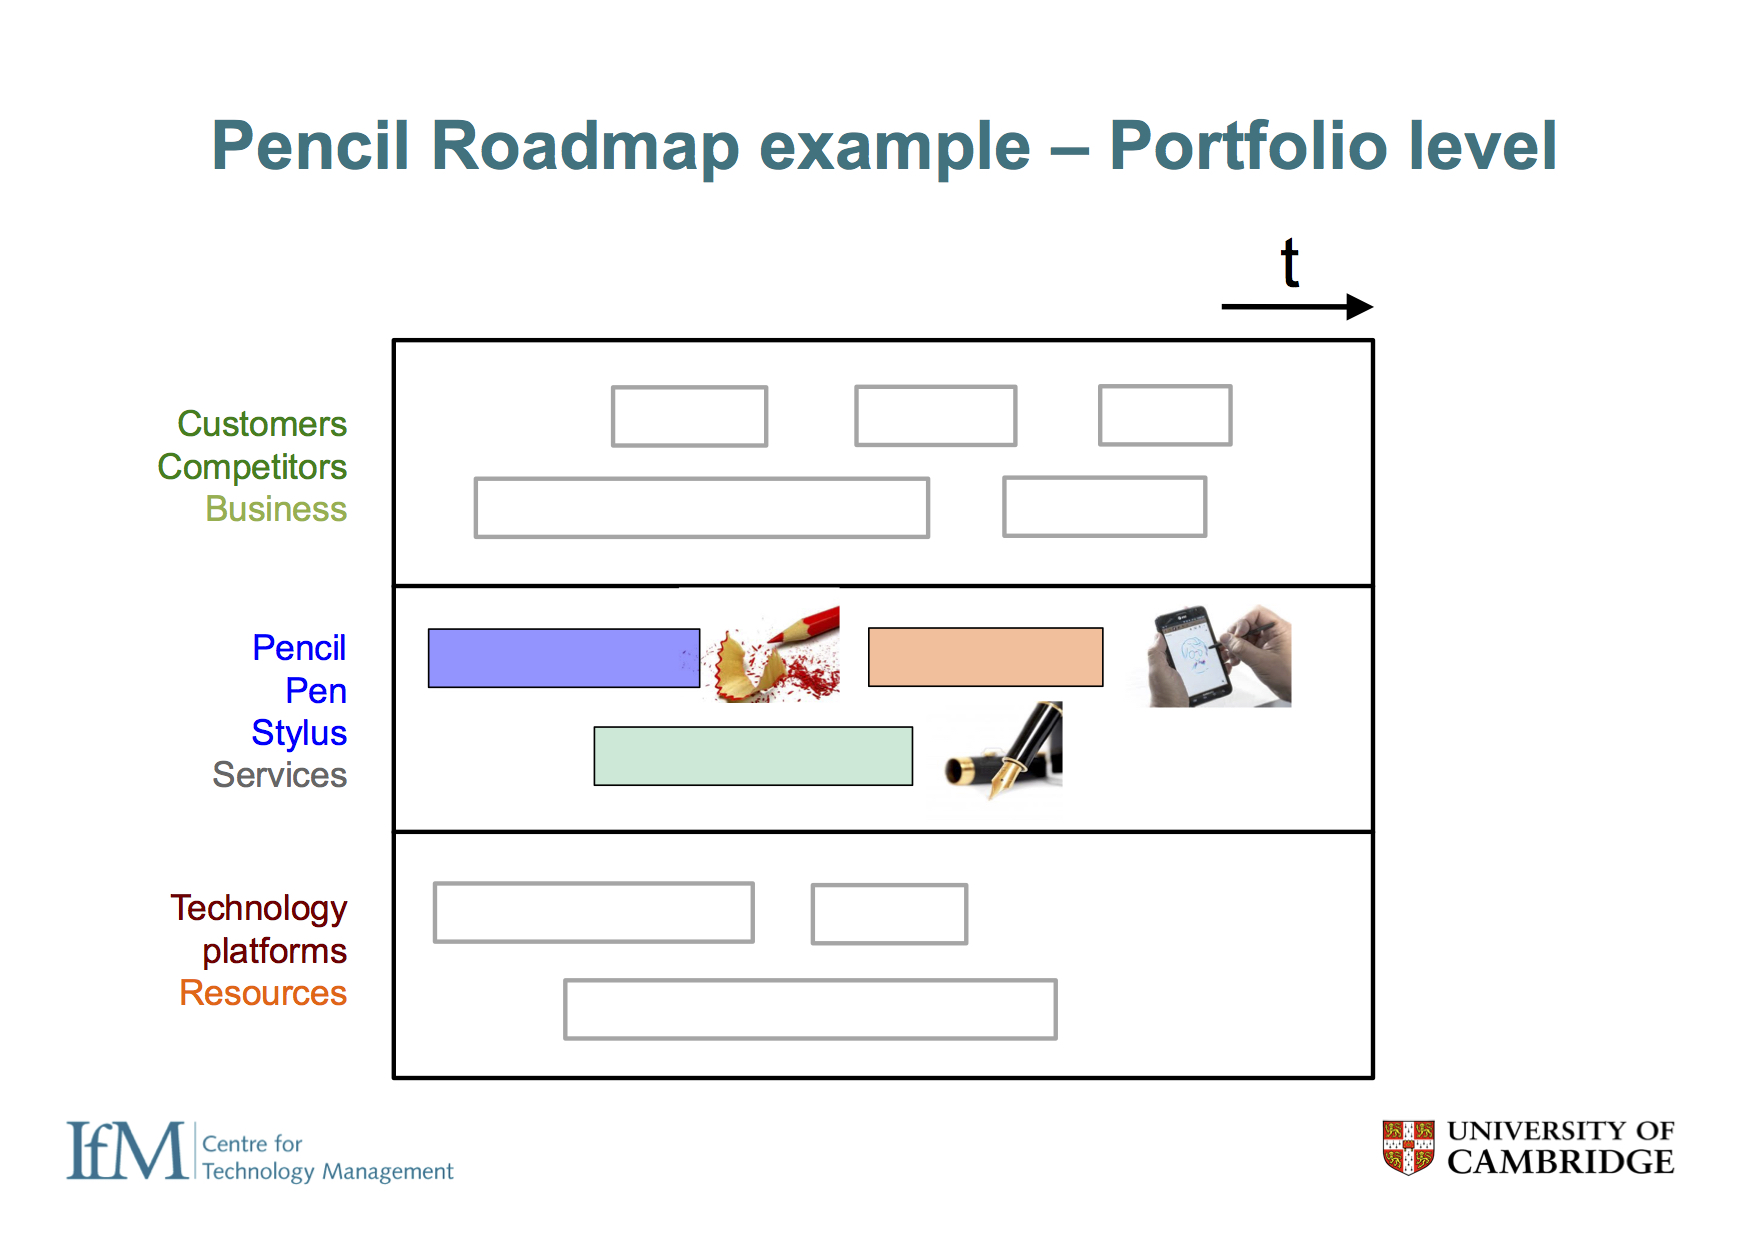  At the portfolio level, the overall strategy can be depicted on one roadmap, showing how pencils, pens and styluses are expected to develop, highlighting synergies or dependences between theses. 